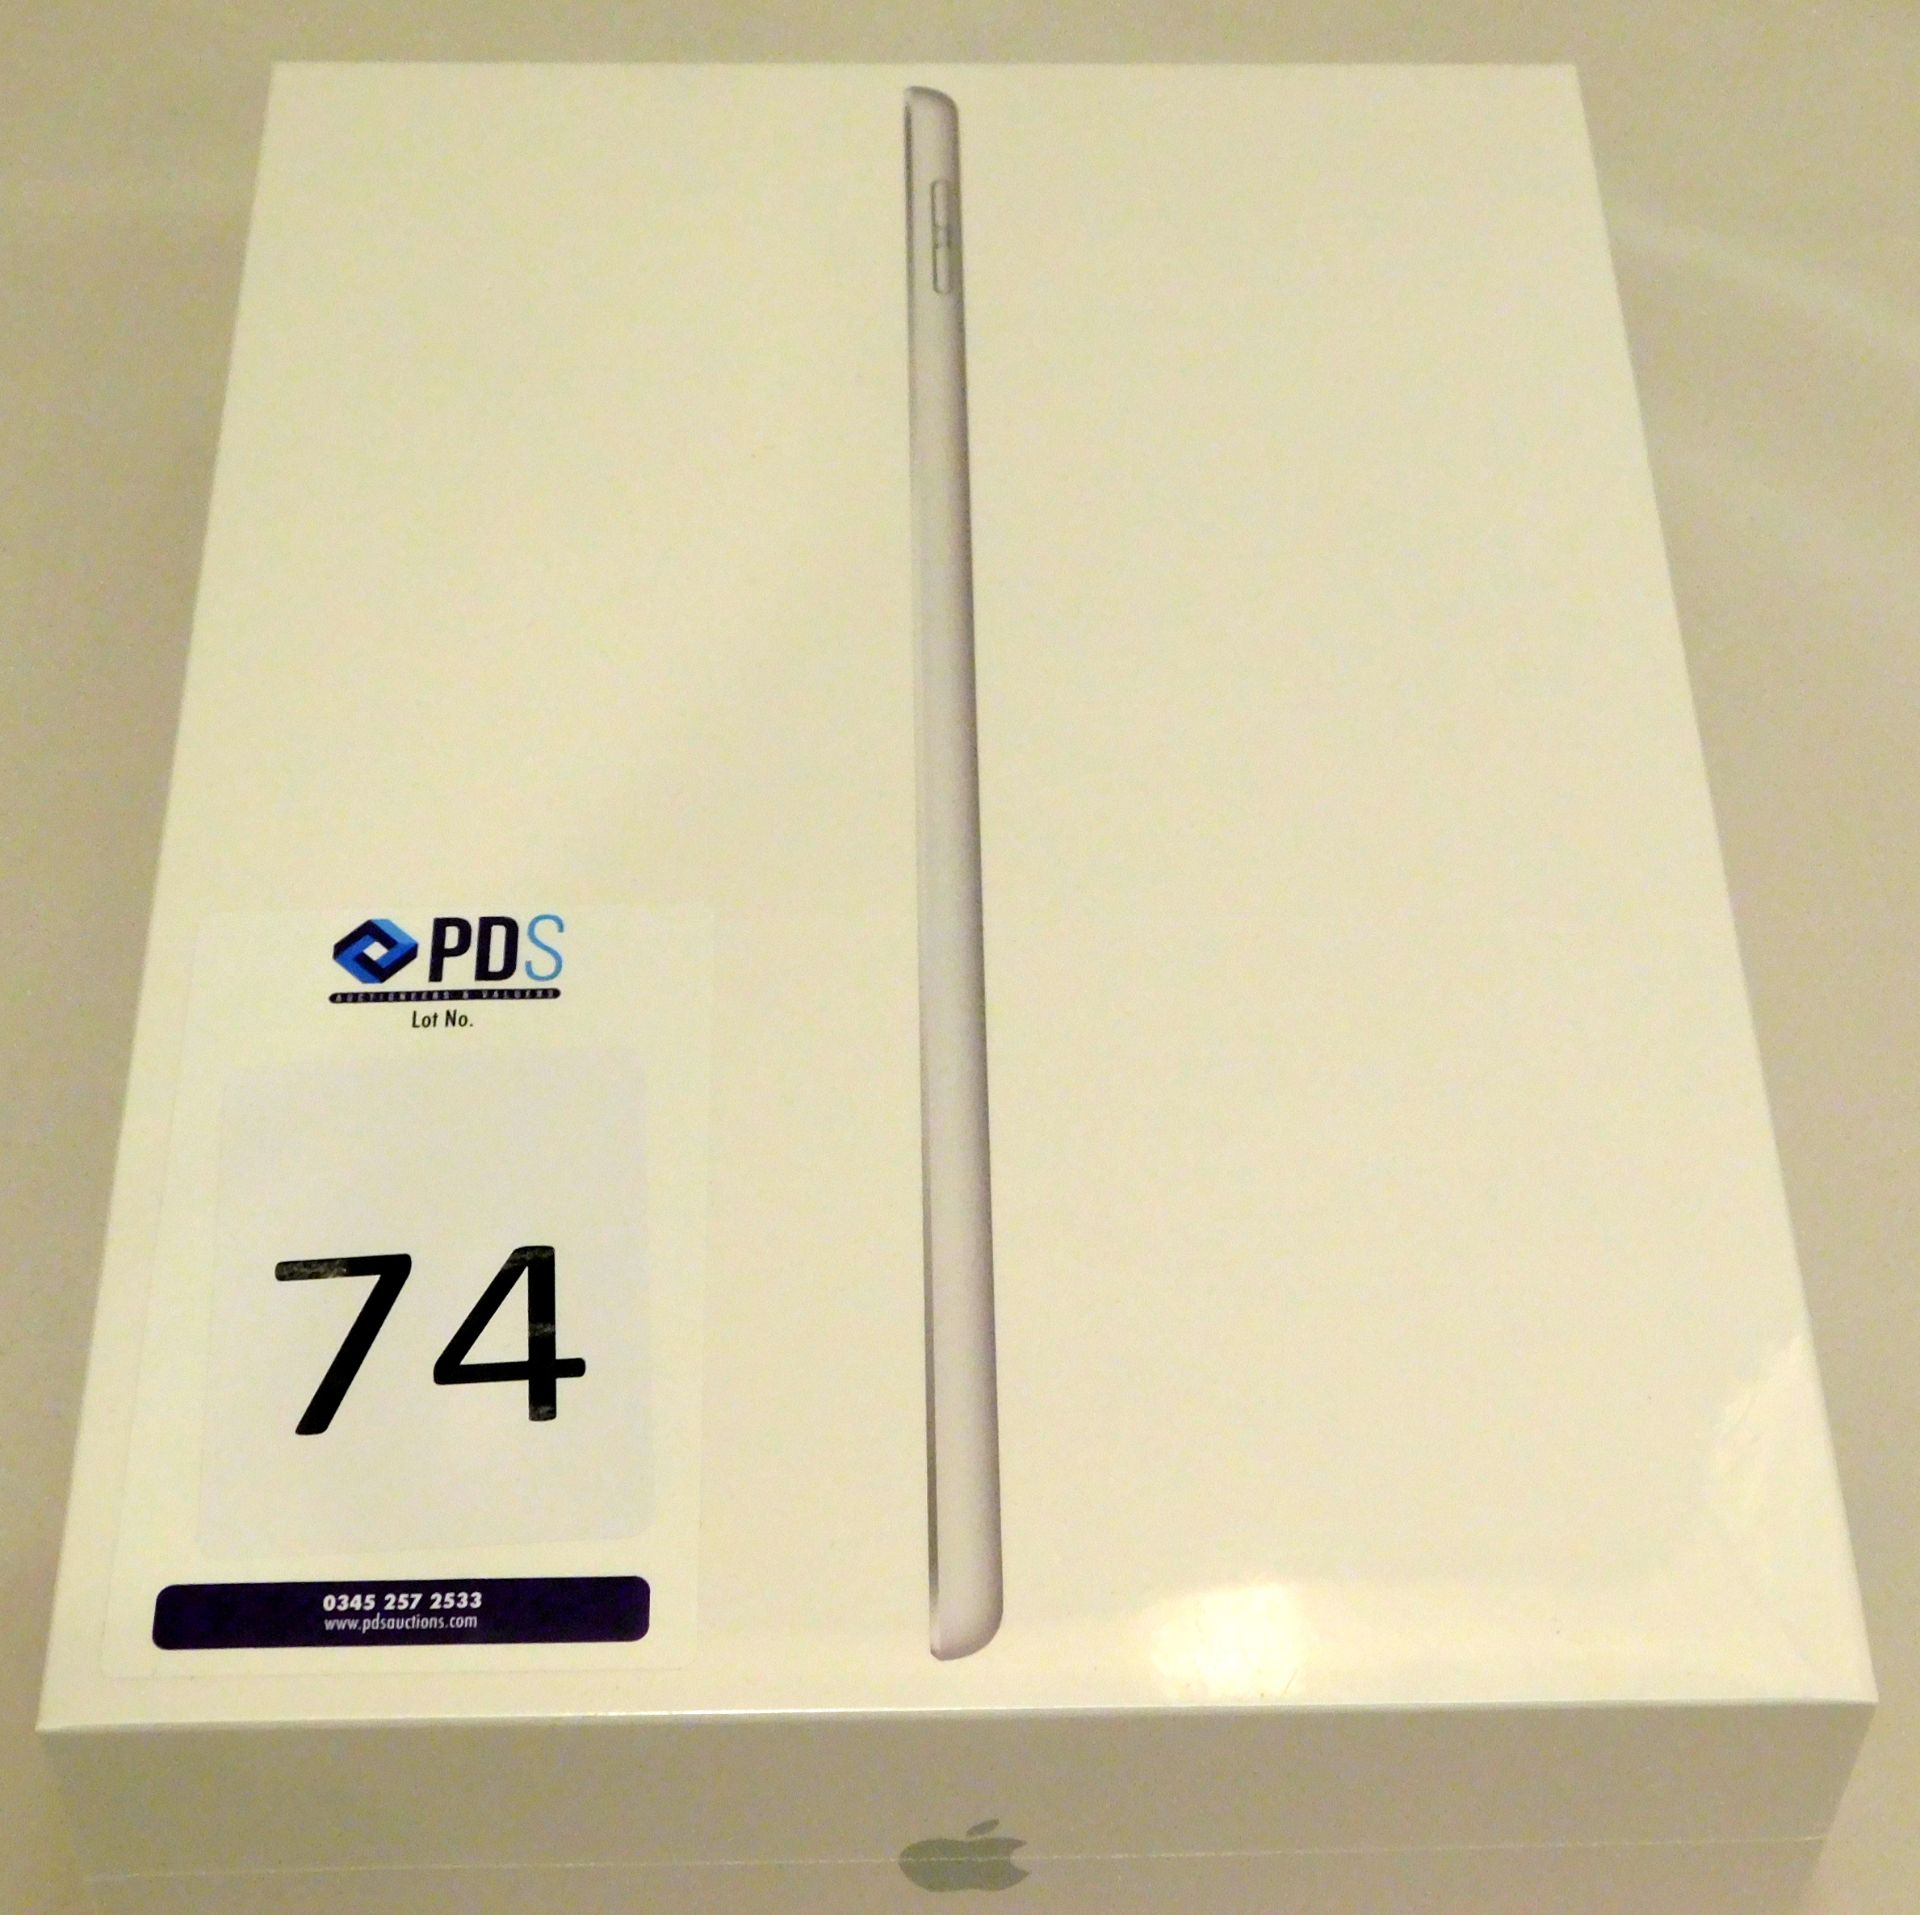 Apple A2197 iPad, 7th Gen, 32GB, Silver, Serial Number: DMPC80ZRMF3N, (New in Sealed Box) (Located